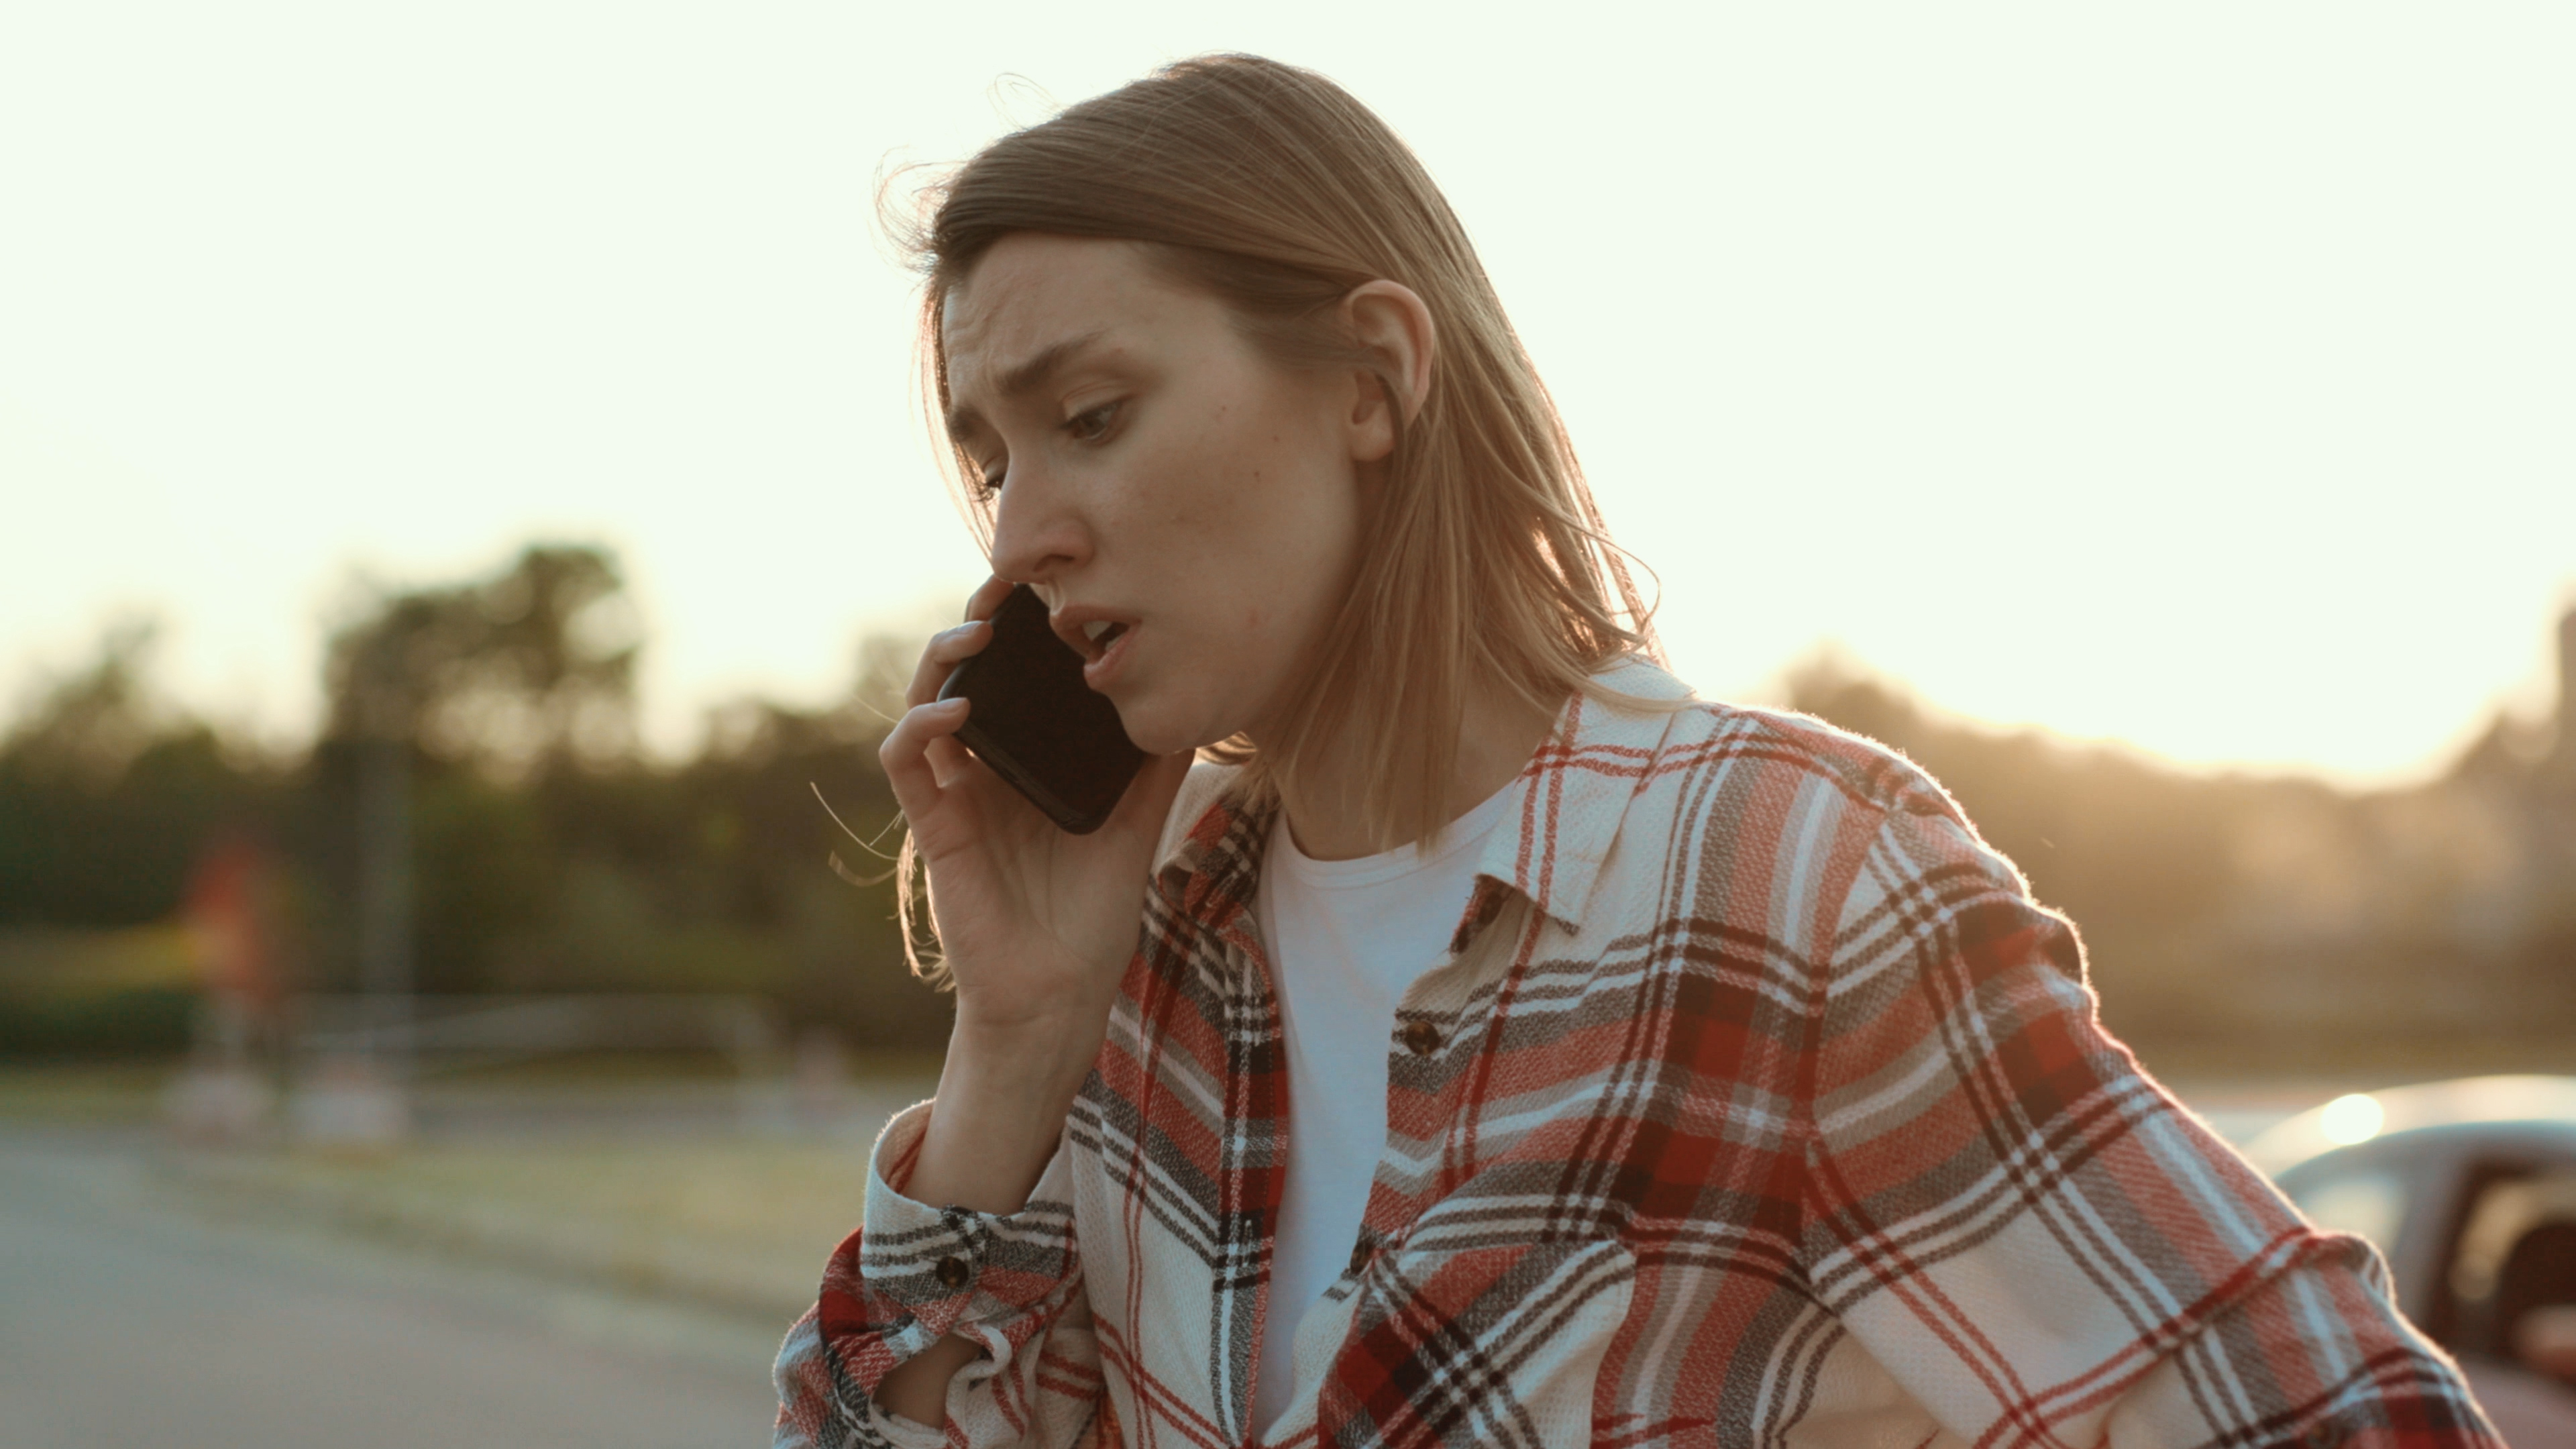 A worried young woman talking on the phone | Source: Shutterstock